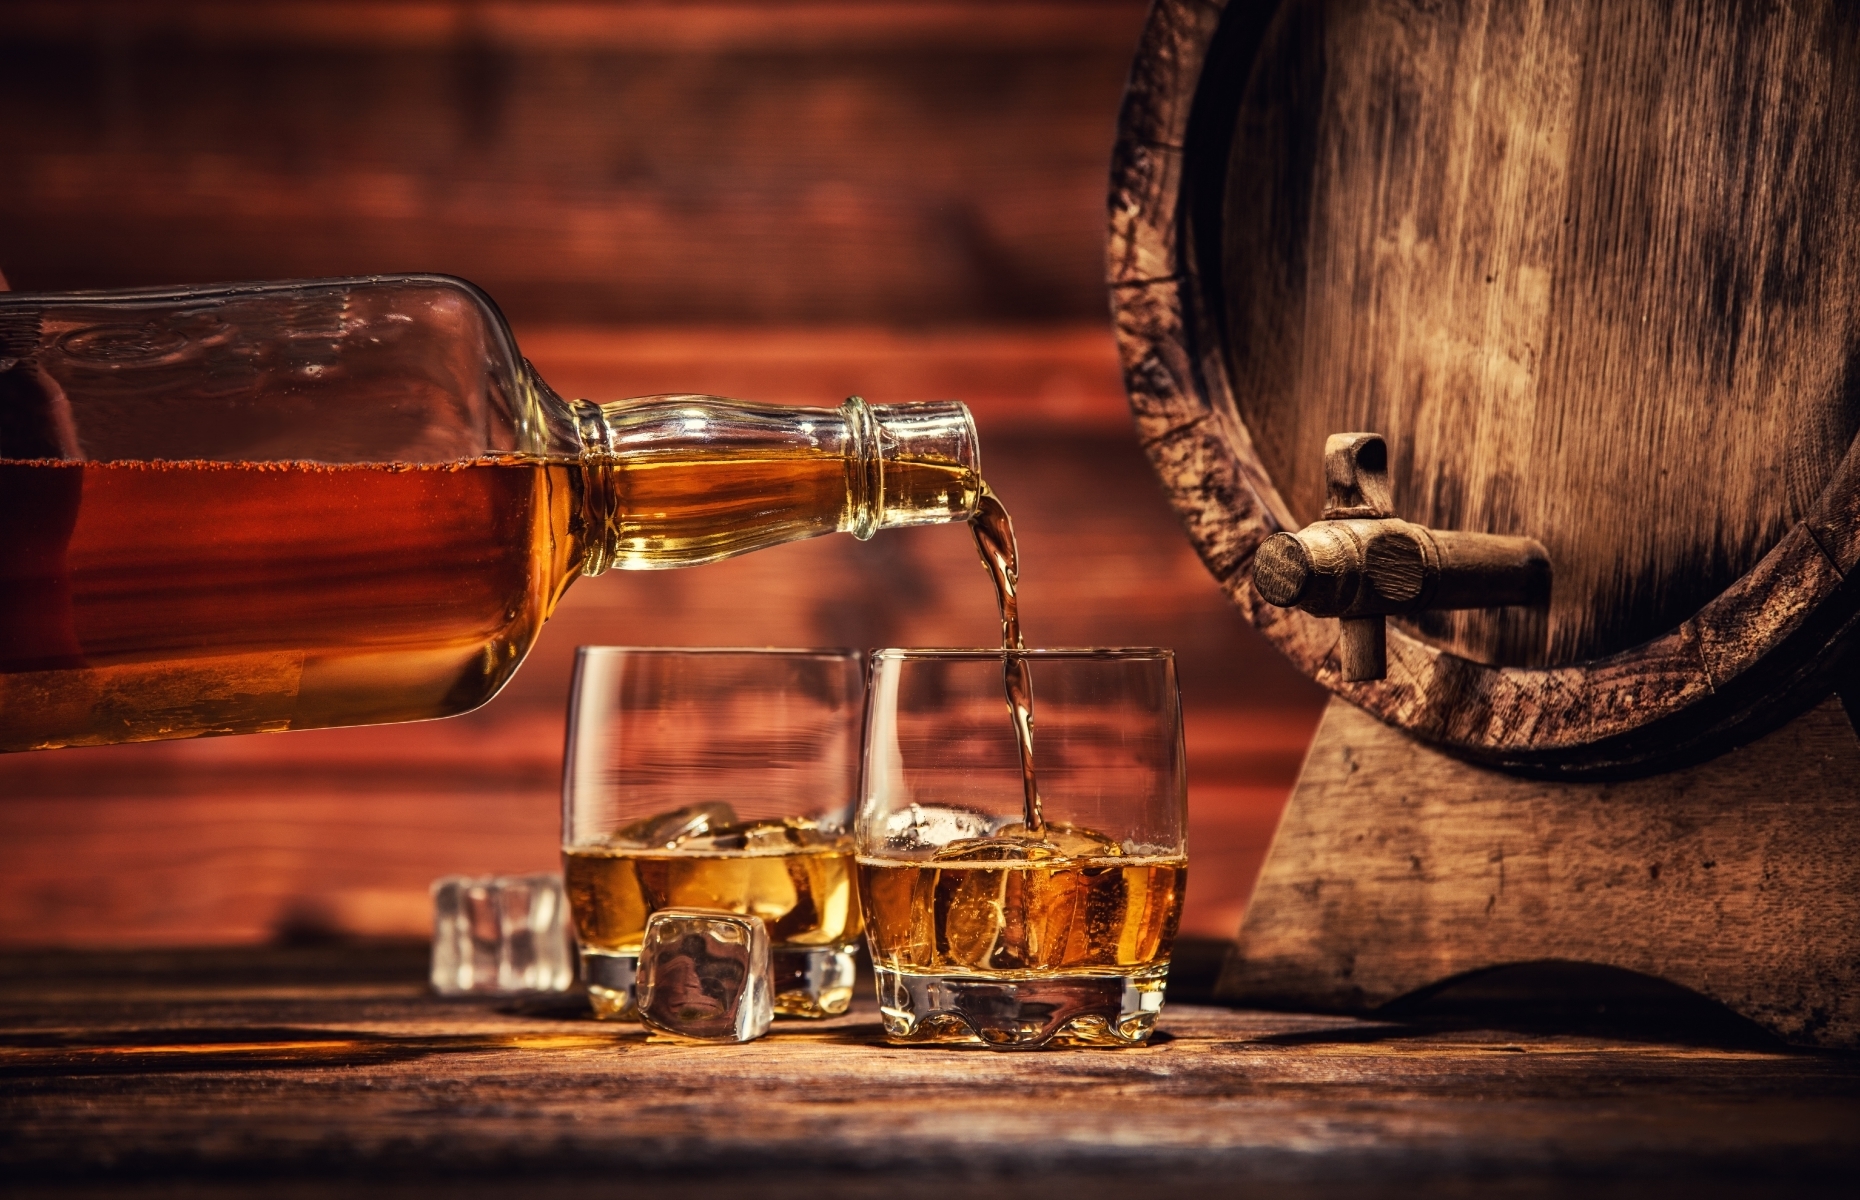 <a href="https://www.thescotchadvocate.com/" rel="noreferrer noopener">Scotch</a>, the country’s national drink, is a type of malt or grain whisky made only in Scotland. From Campbeltown to Islay, you’ll find many <a href="https://www.visitscotland.com/things-to-do/food-drink/whisky/distilleries/" rel="noreferrer noopener">distilleries</a> in whatever region you visit. Each locale offers its own version of Scotch, and you may notice some differences, such as woody versus fruity notes or a unique aging process. Edinburgh offers several exclusive tastings, including the <a href="https://www.johnniewalker.com/en-ca/" rel="noreferrer noopener">Johnnie Walker Experience</a> on Princes Street.